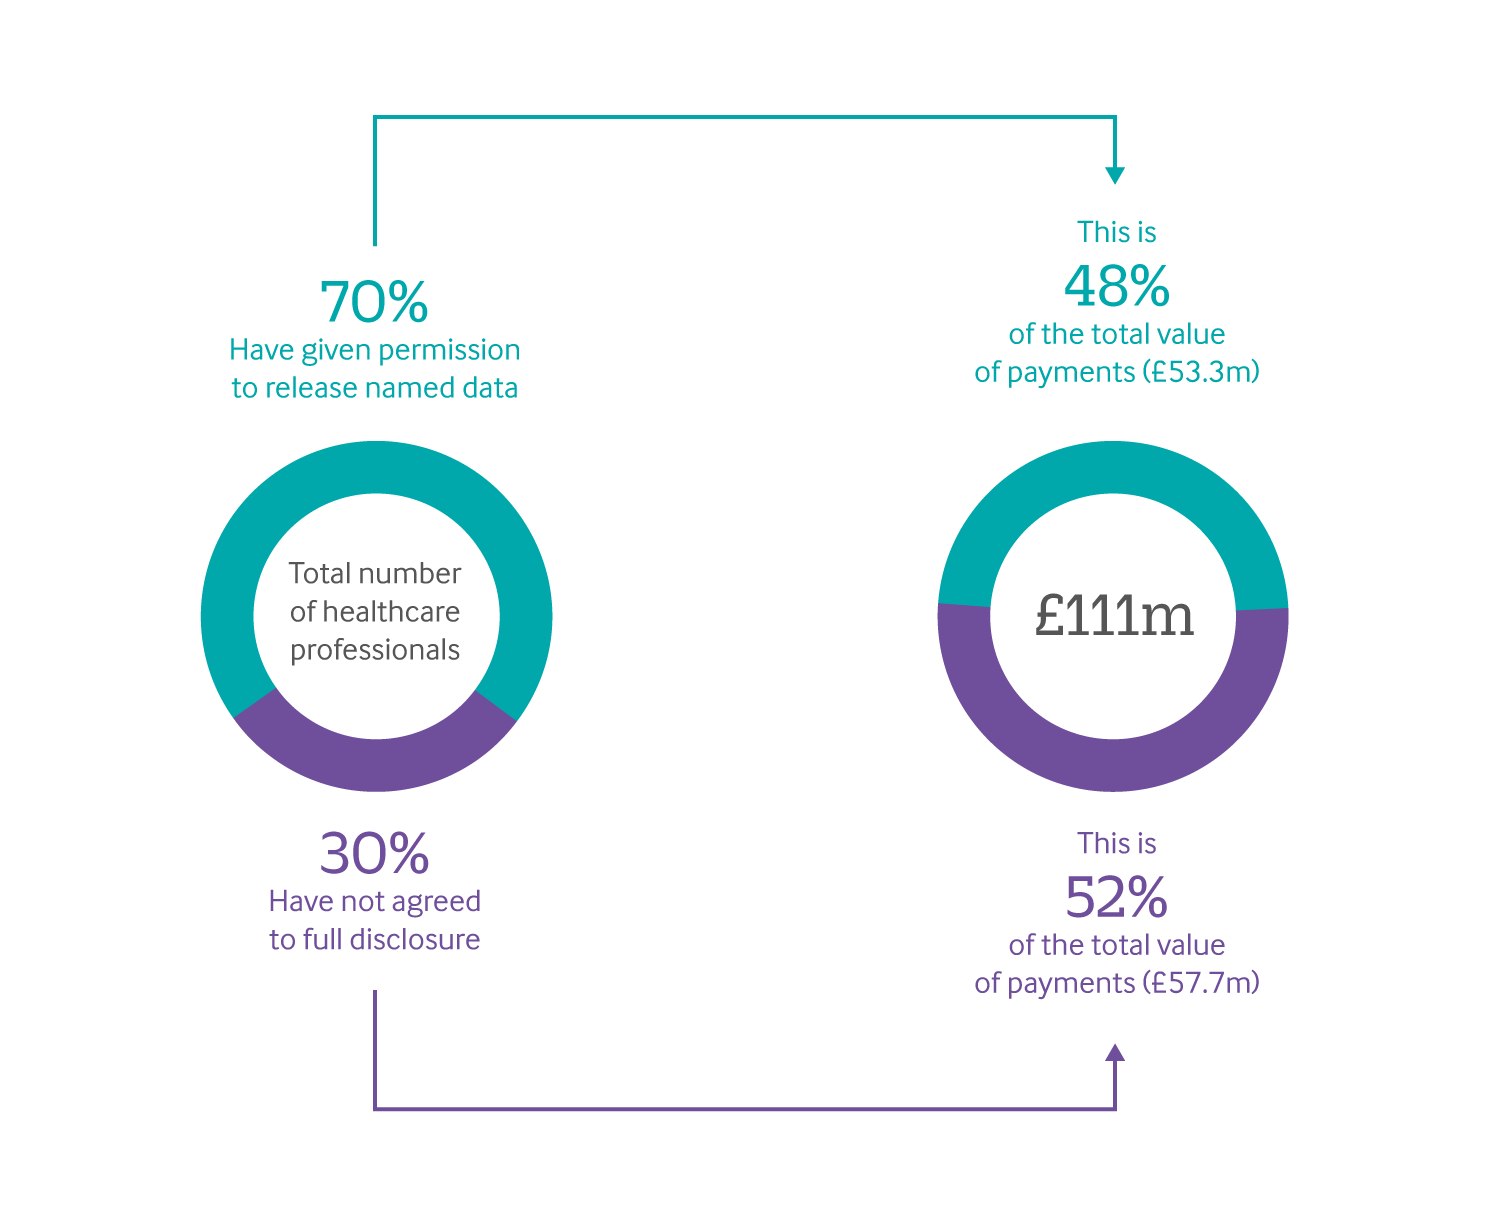 infographic showing that 70% of healthcare professionals have given permission to release named data, but this is only 48% of the total value of payments.